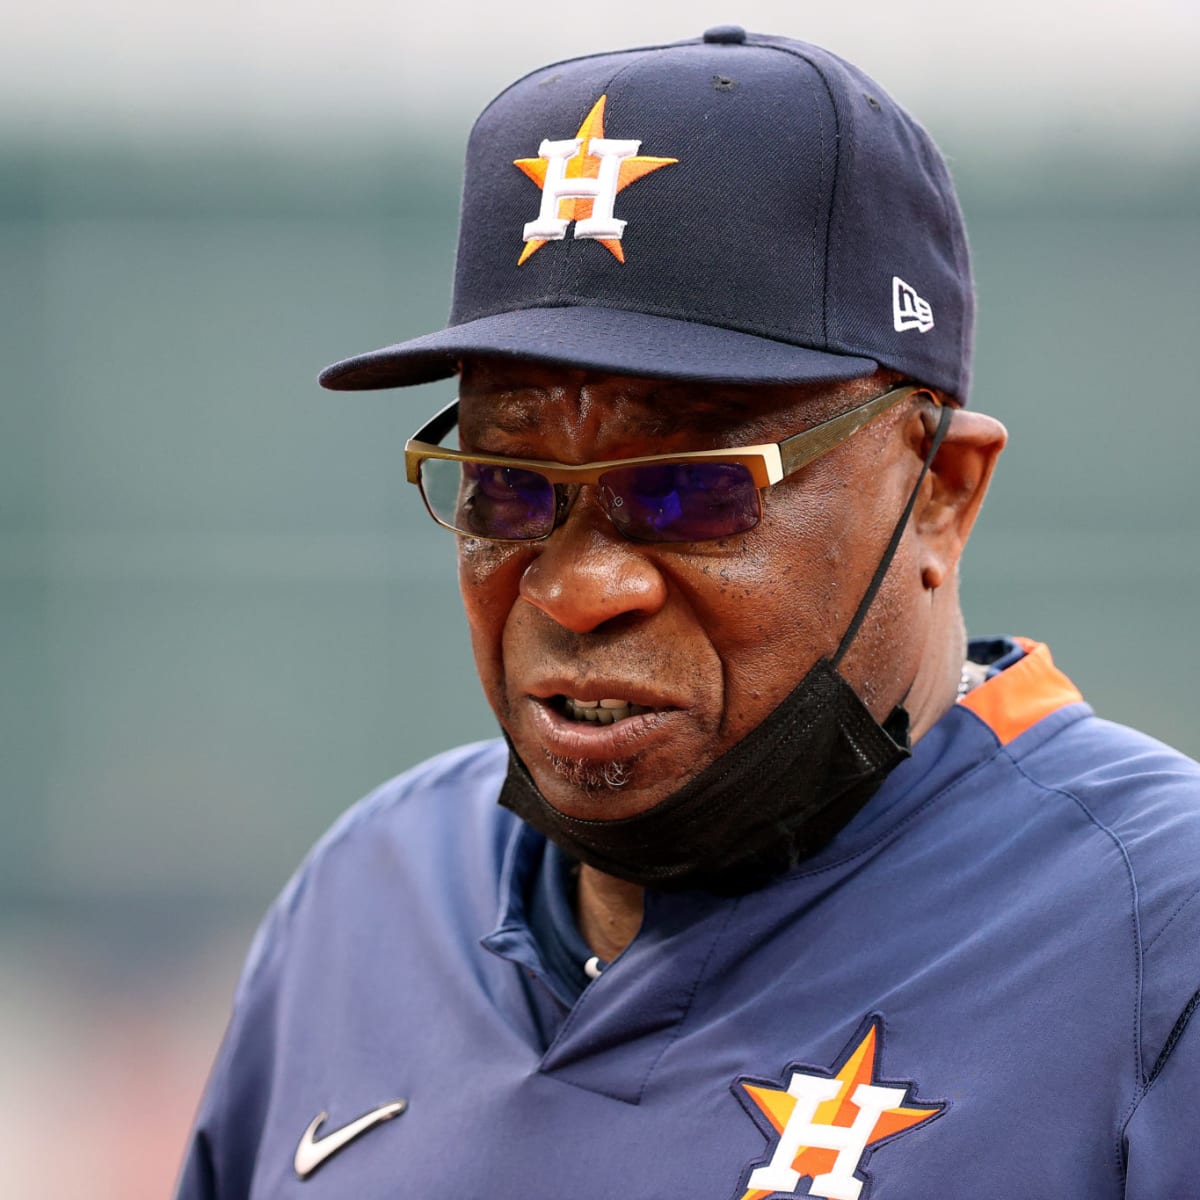 Behind scenes: Dusty Baker, Astros manager, wins historic 2,000th game